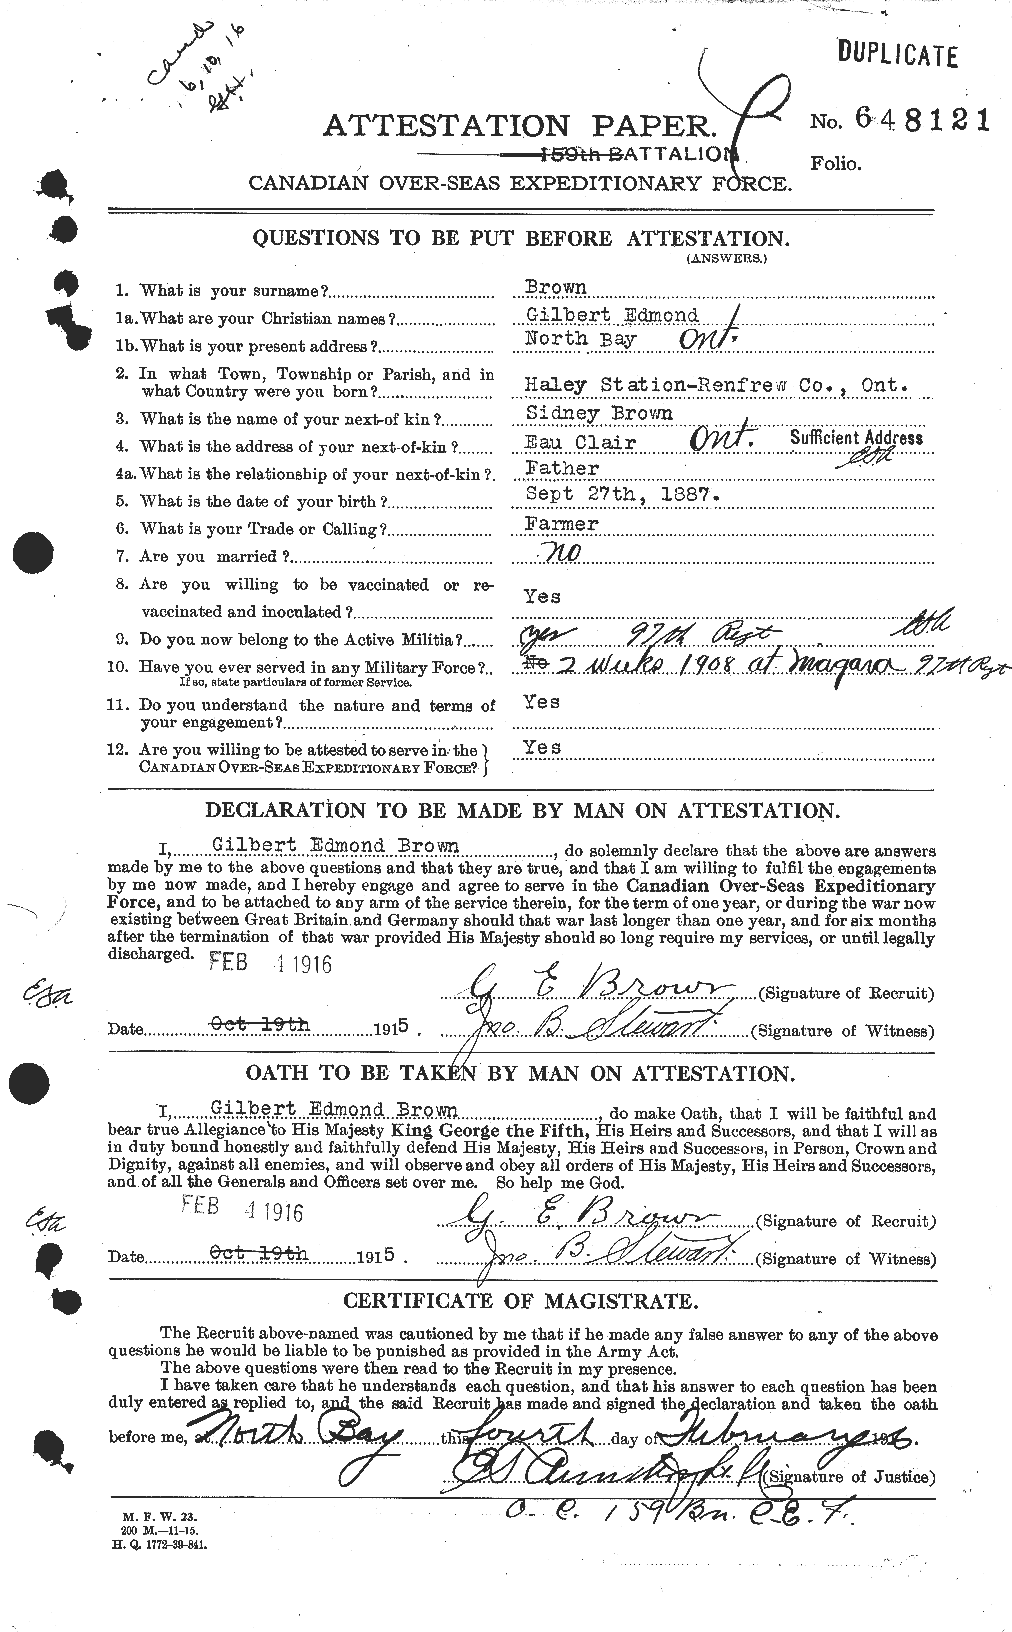 Personnel Records of the First World War - CEF 262614a